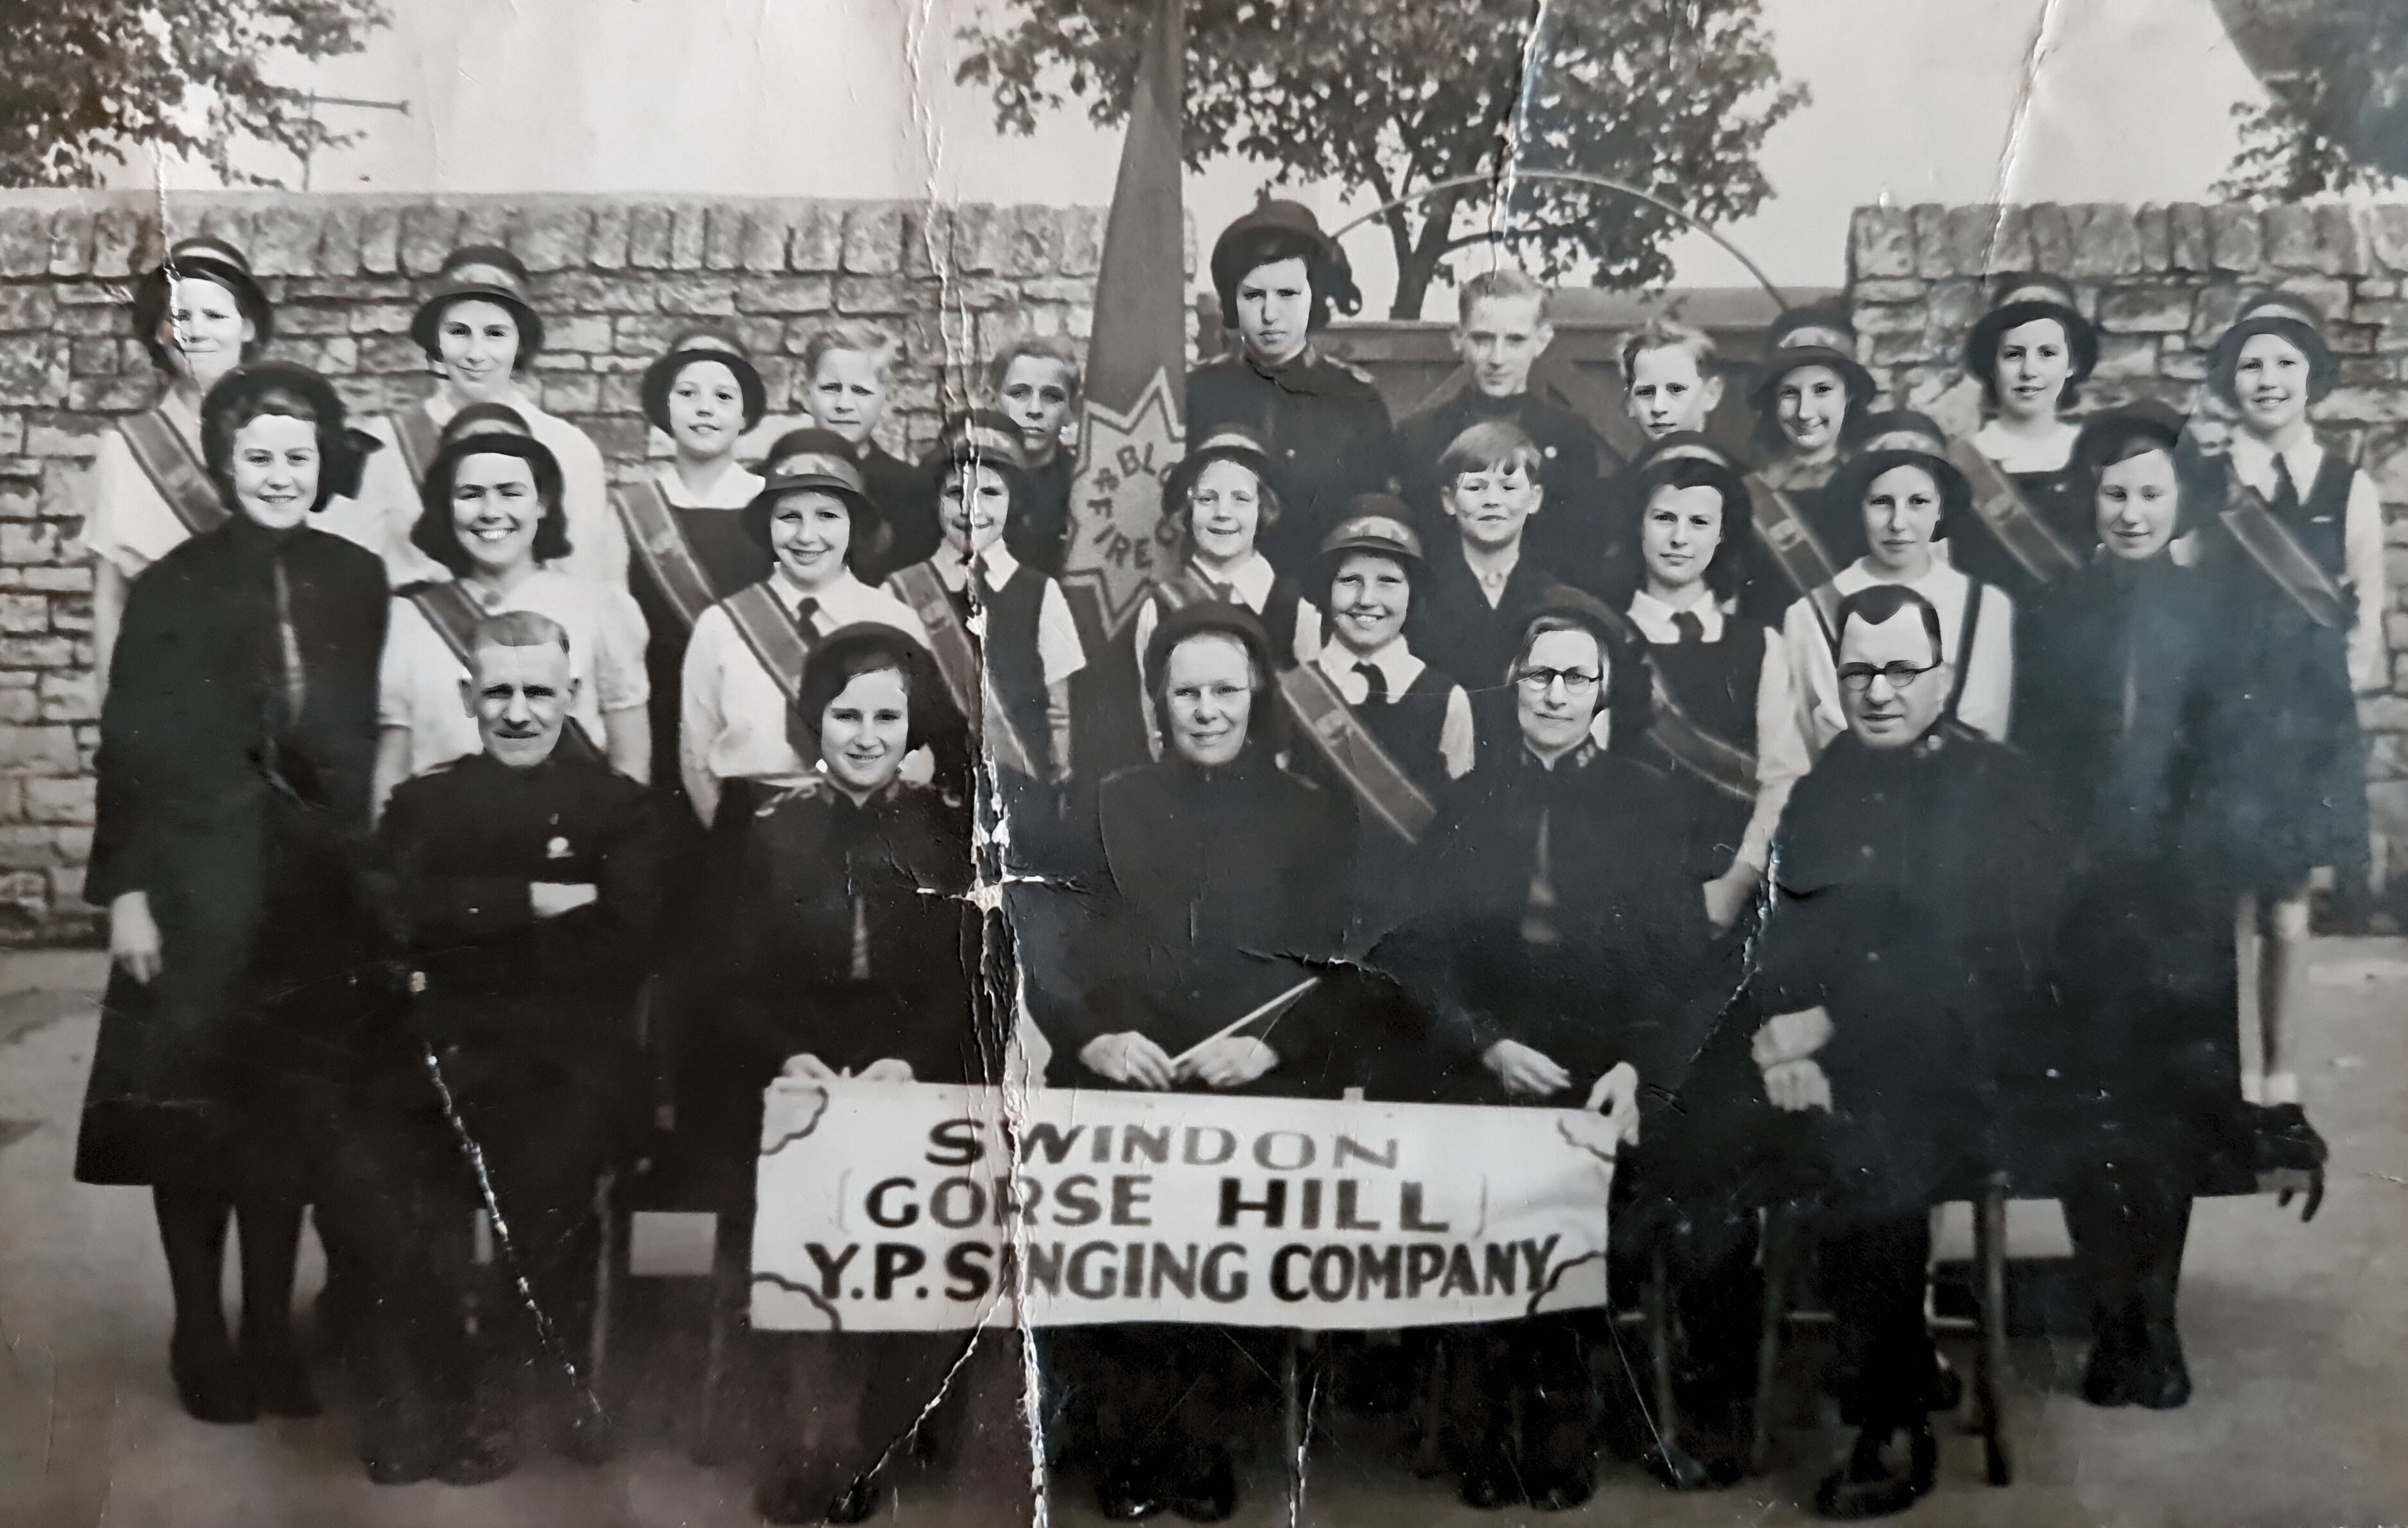 Iris Graves, top left. Gorse Hill, Swindon, around 1930. Salvation Army Young Singers.